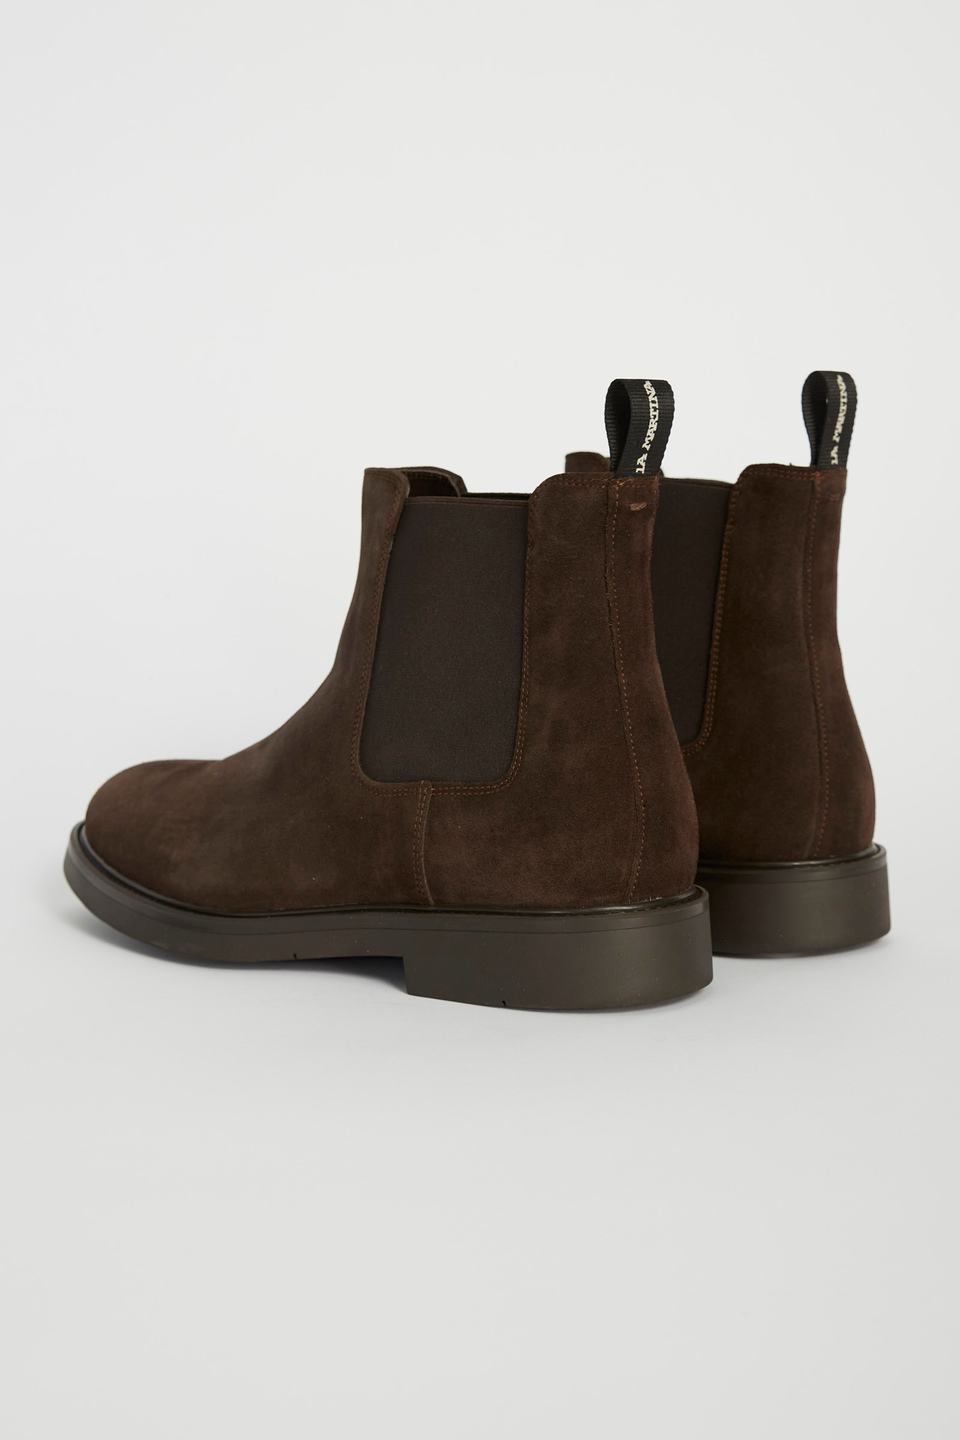 Mixed leather chelsea boot | La Martina - Official Online Shop